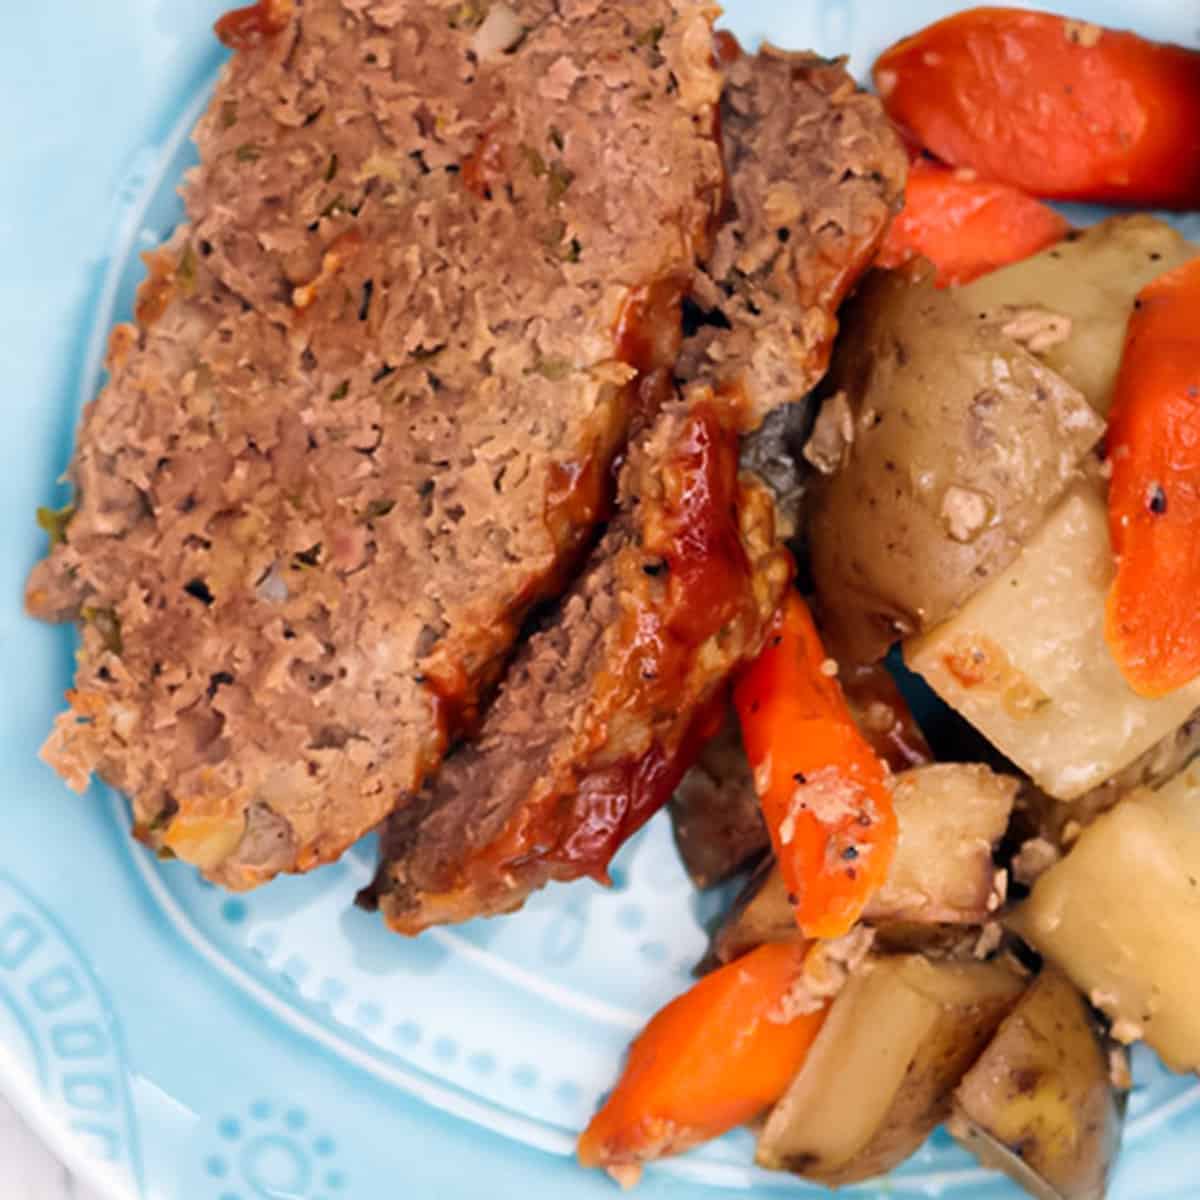 slices of crock pot meatloaf with carrots and potatoes